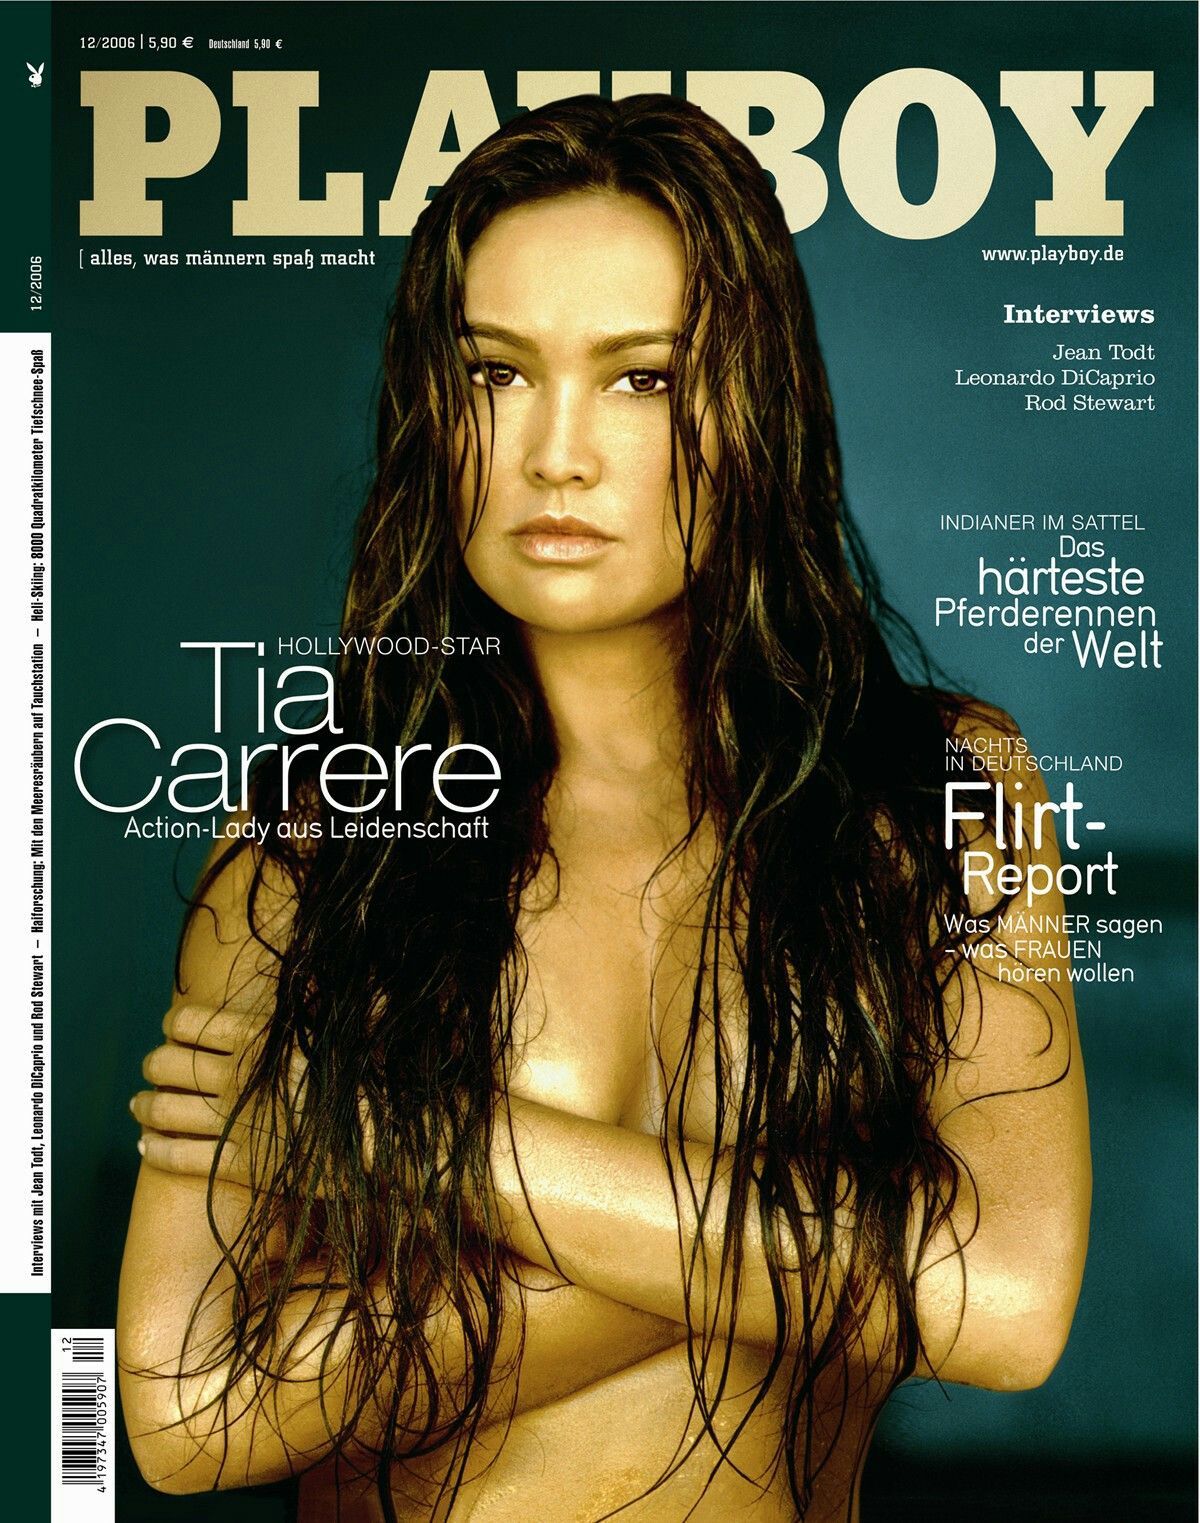 Playboy tia pictures carrere 65+ Hot